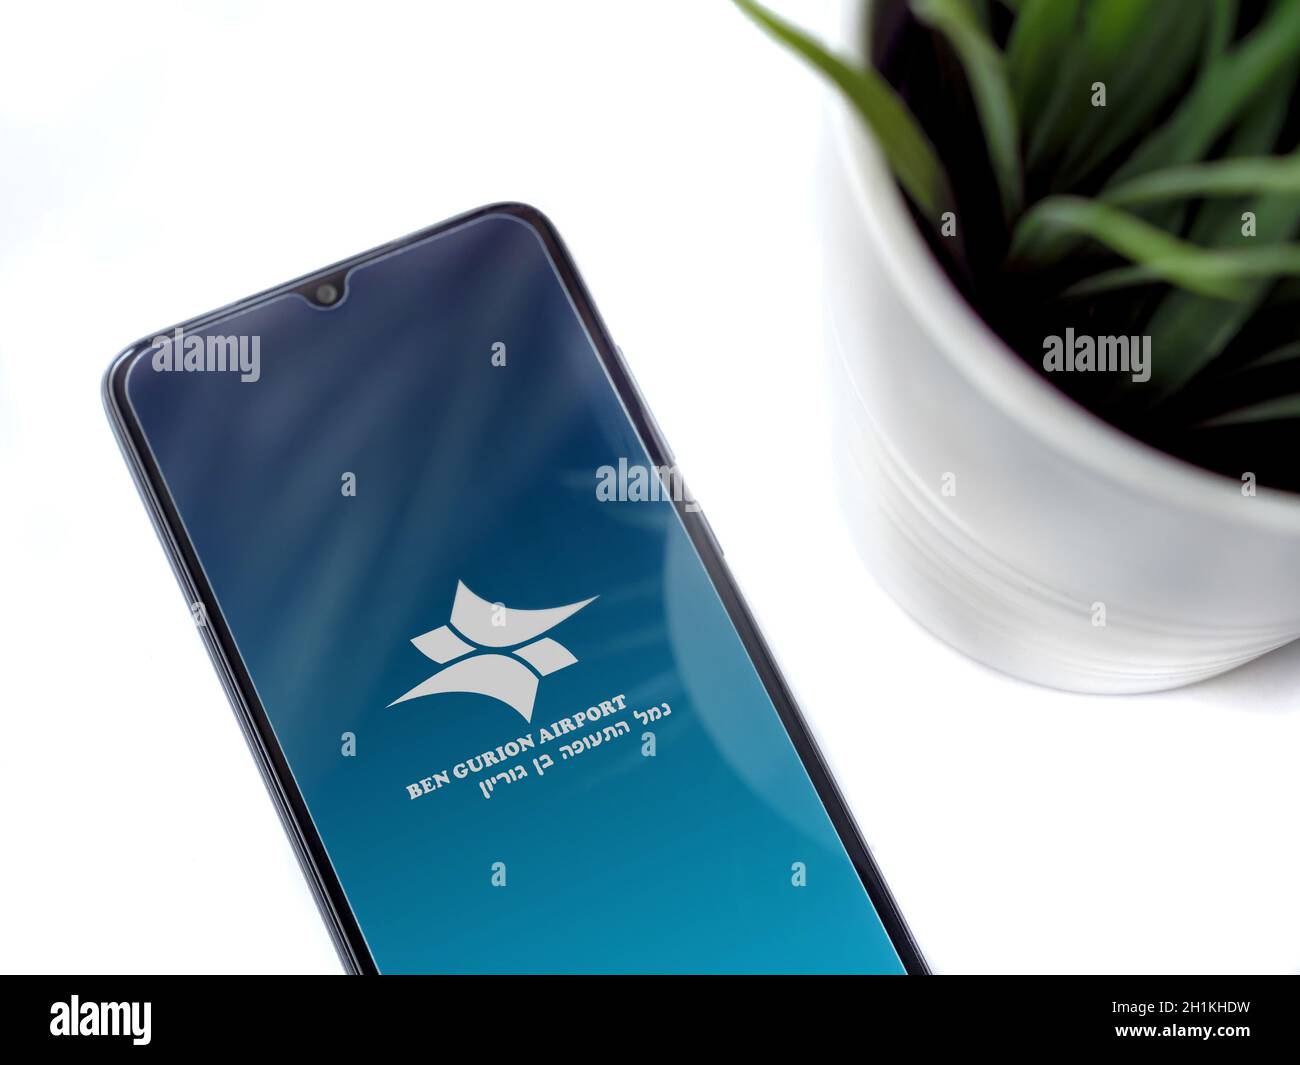 Lod, Israel - July 8, 2020: Modern minimalist office workspace with black mobile smartphone with Ben Gurion Airport app launch screen with logo on whi Stock Photo